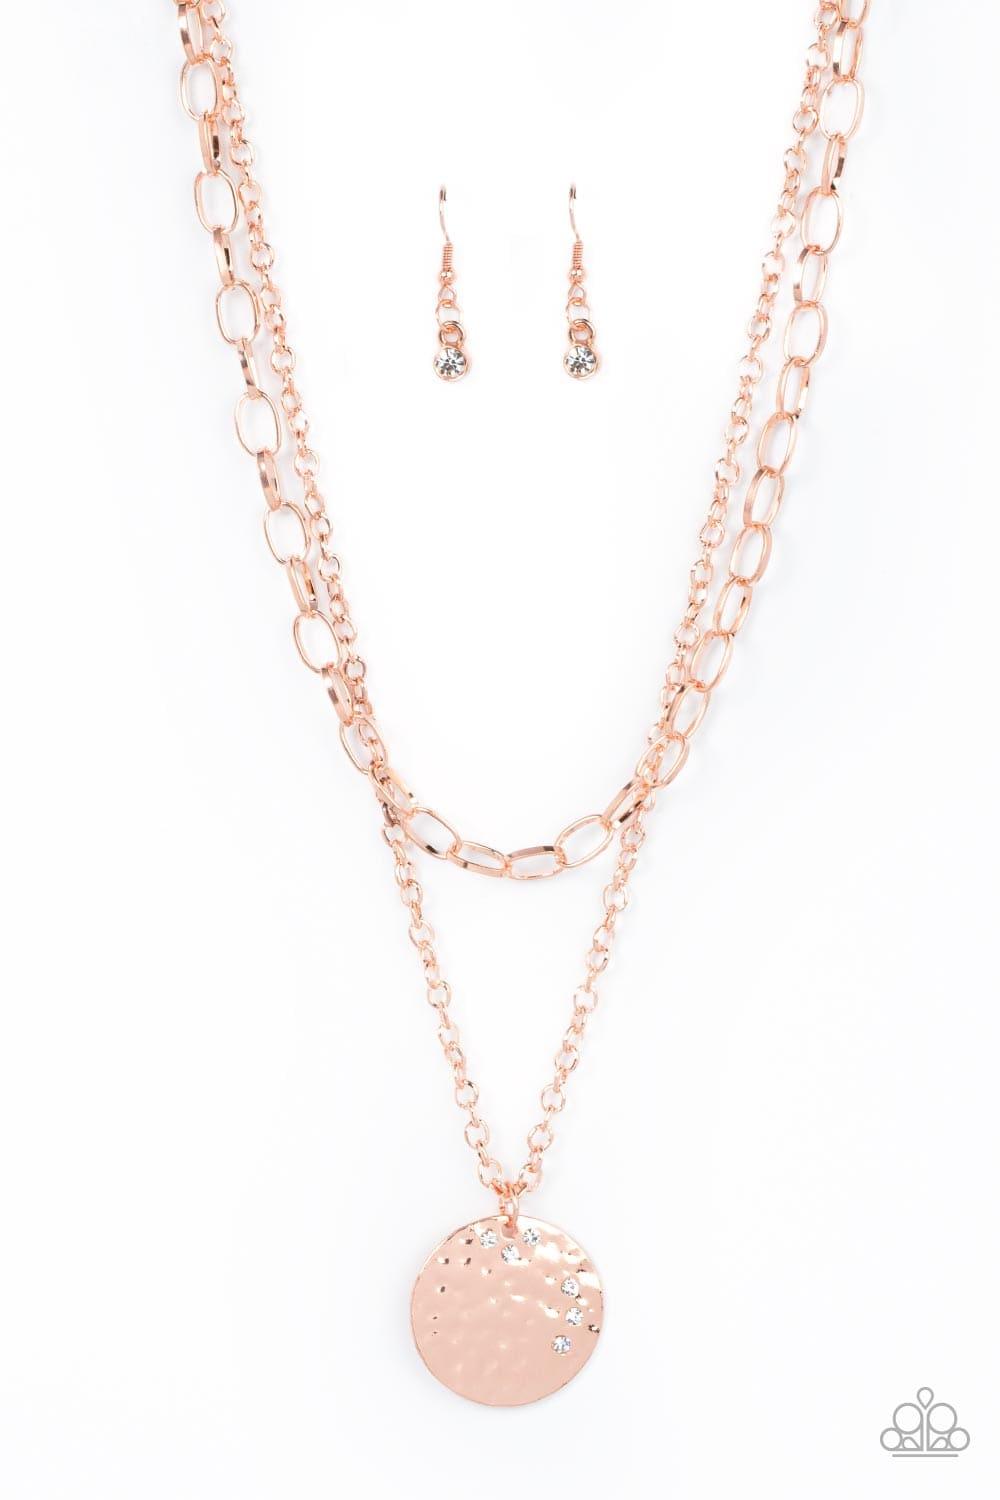 Paparazzi Accessories - Highlight Of My Life - Copper Necklace - Bling by JessieK